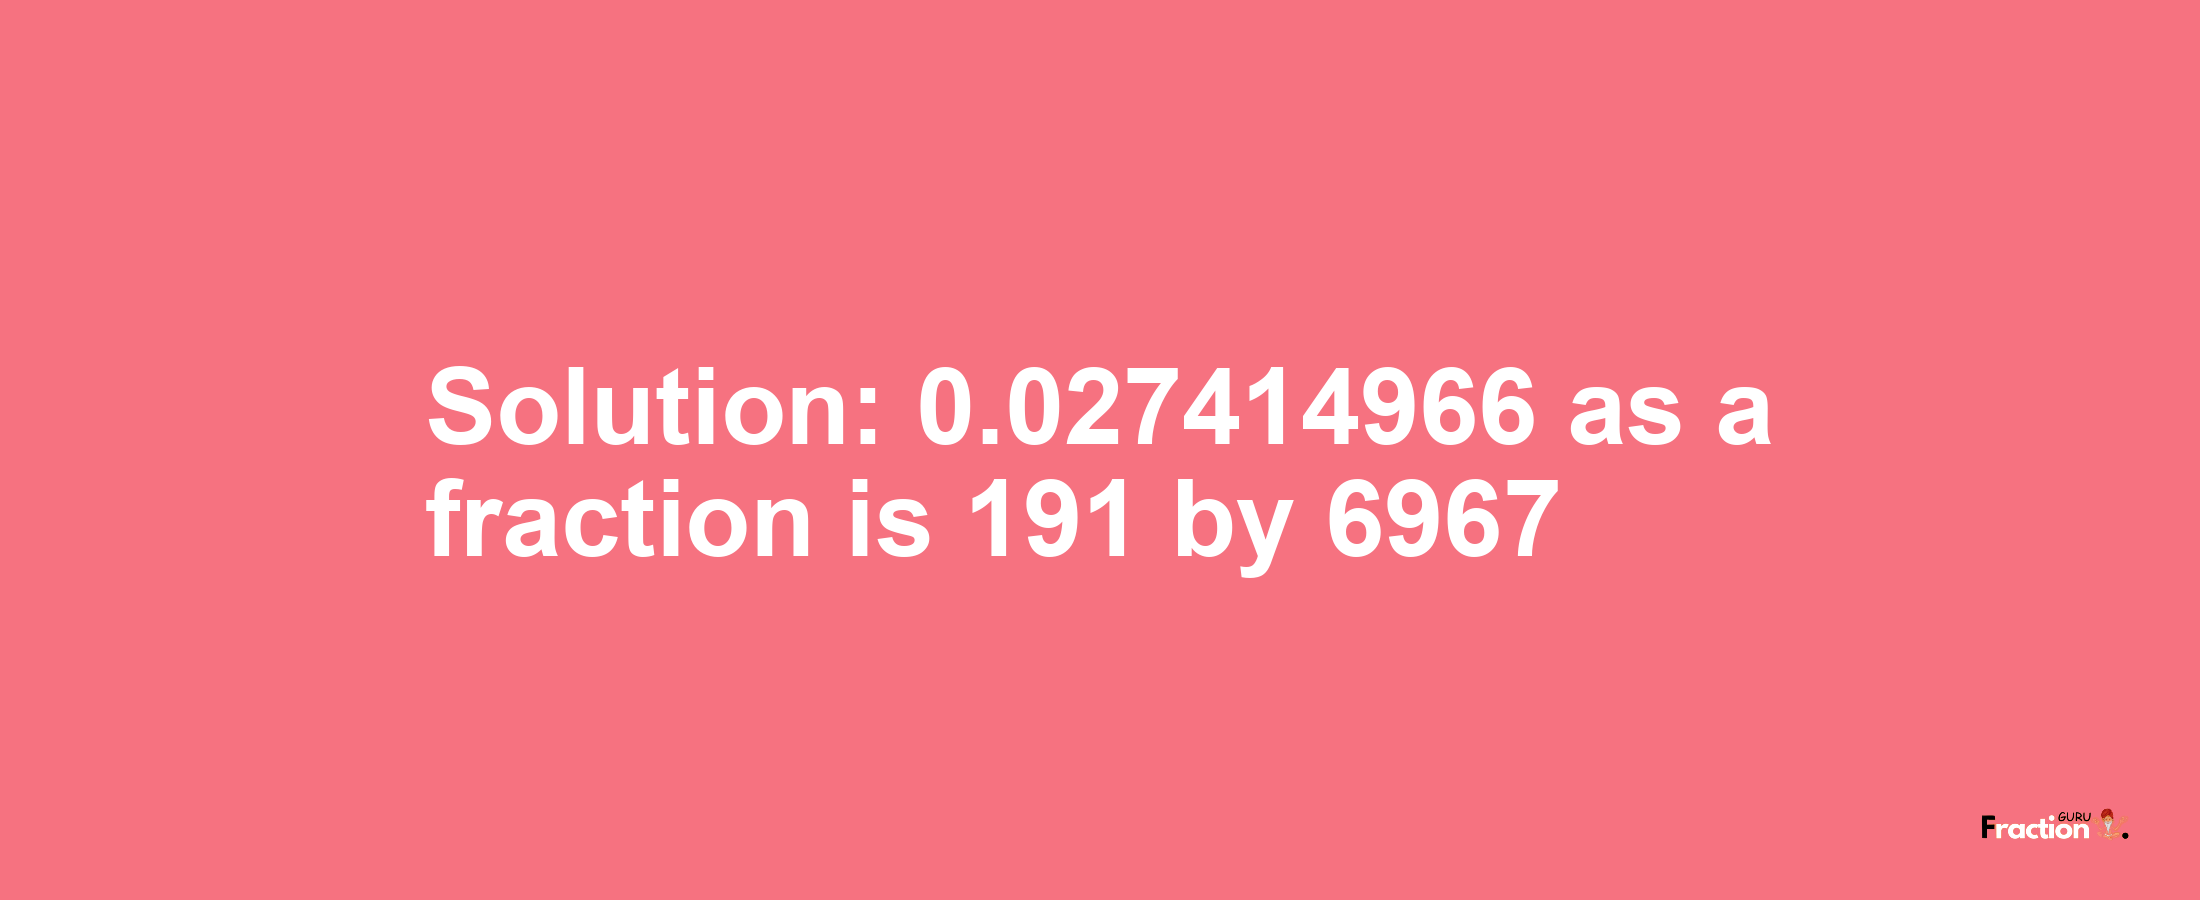 Solution:0.027414966 as a fraction is 191/6967